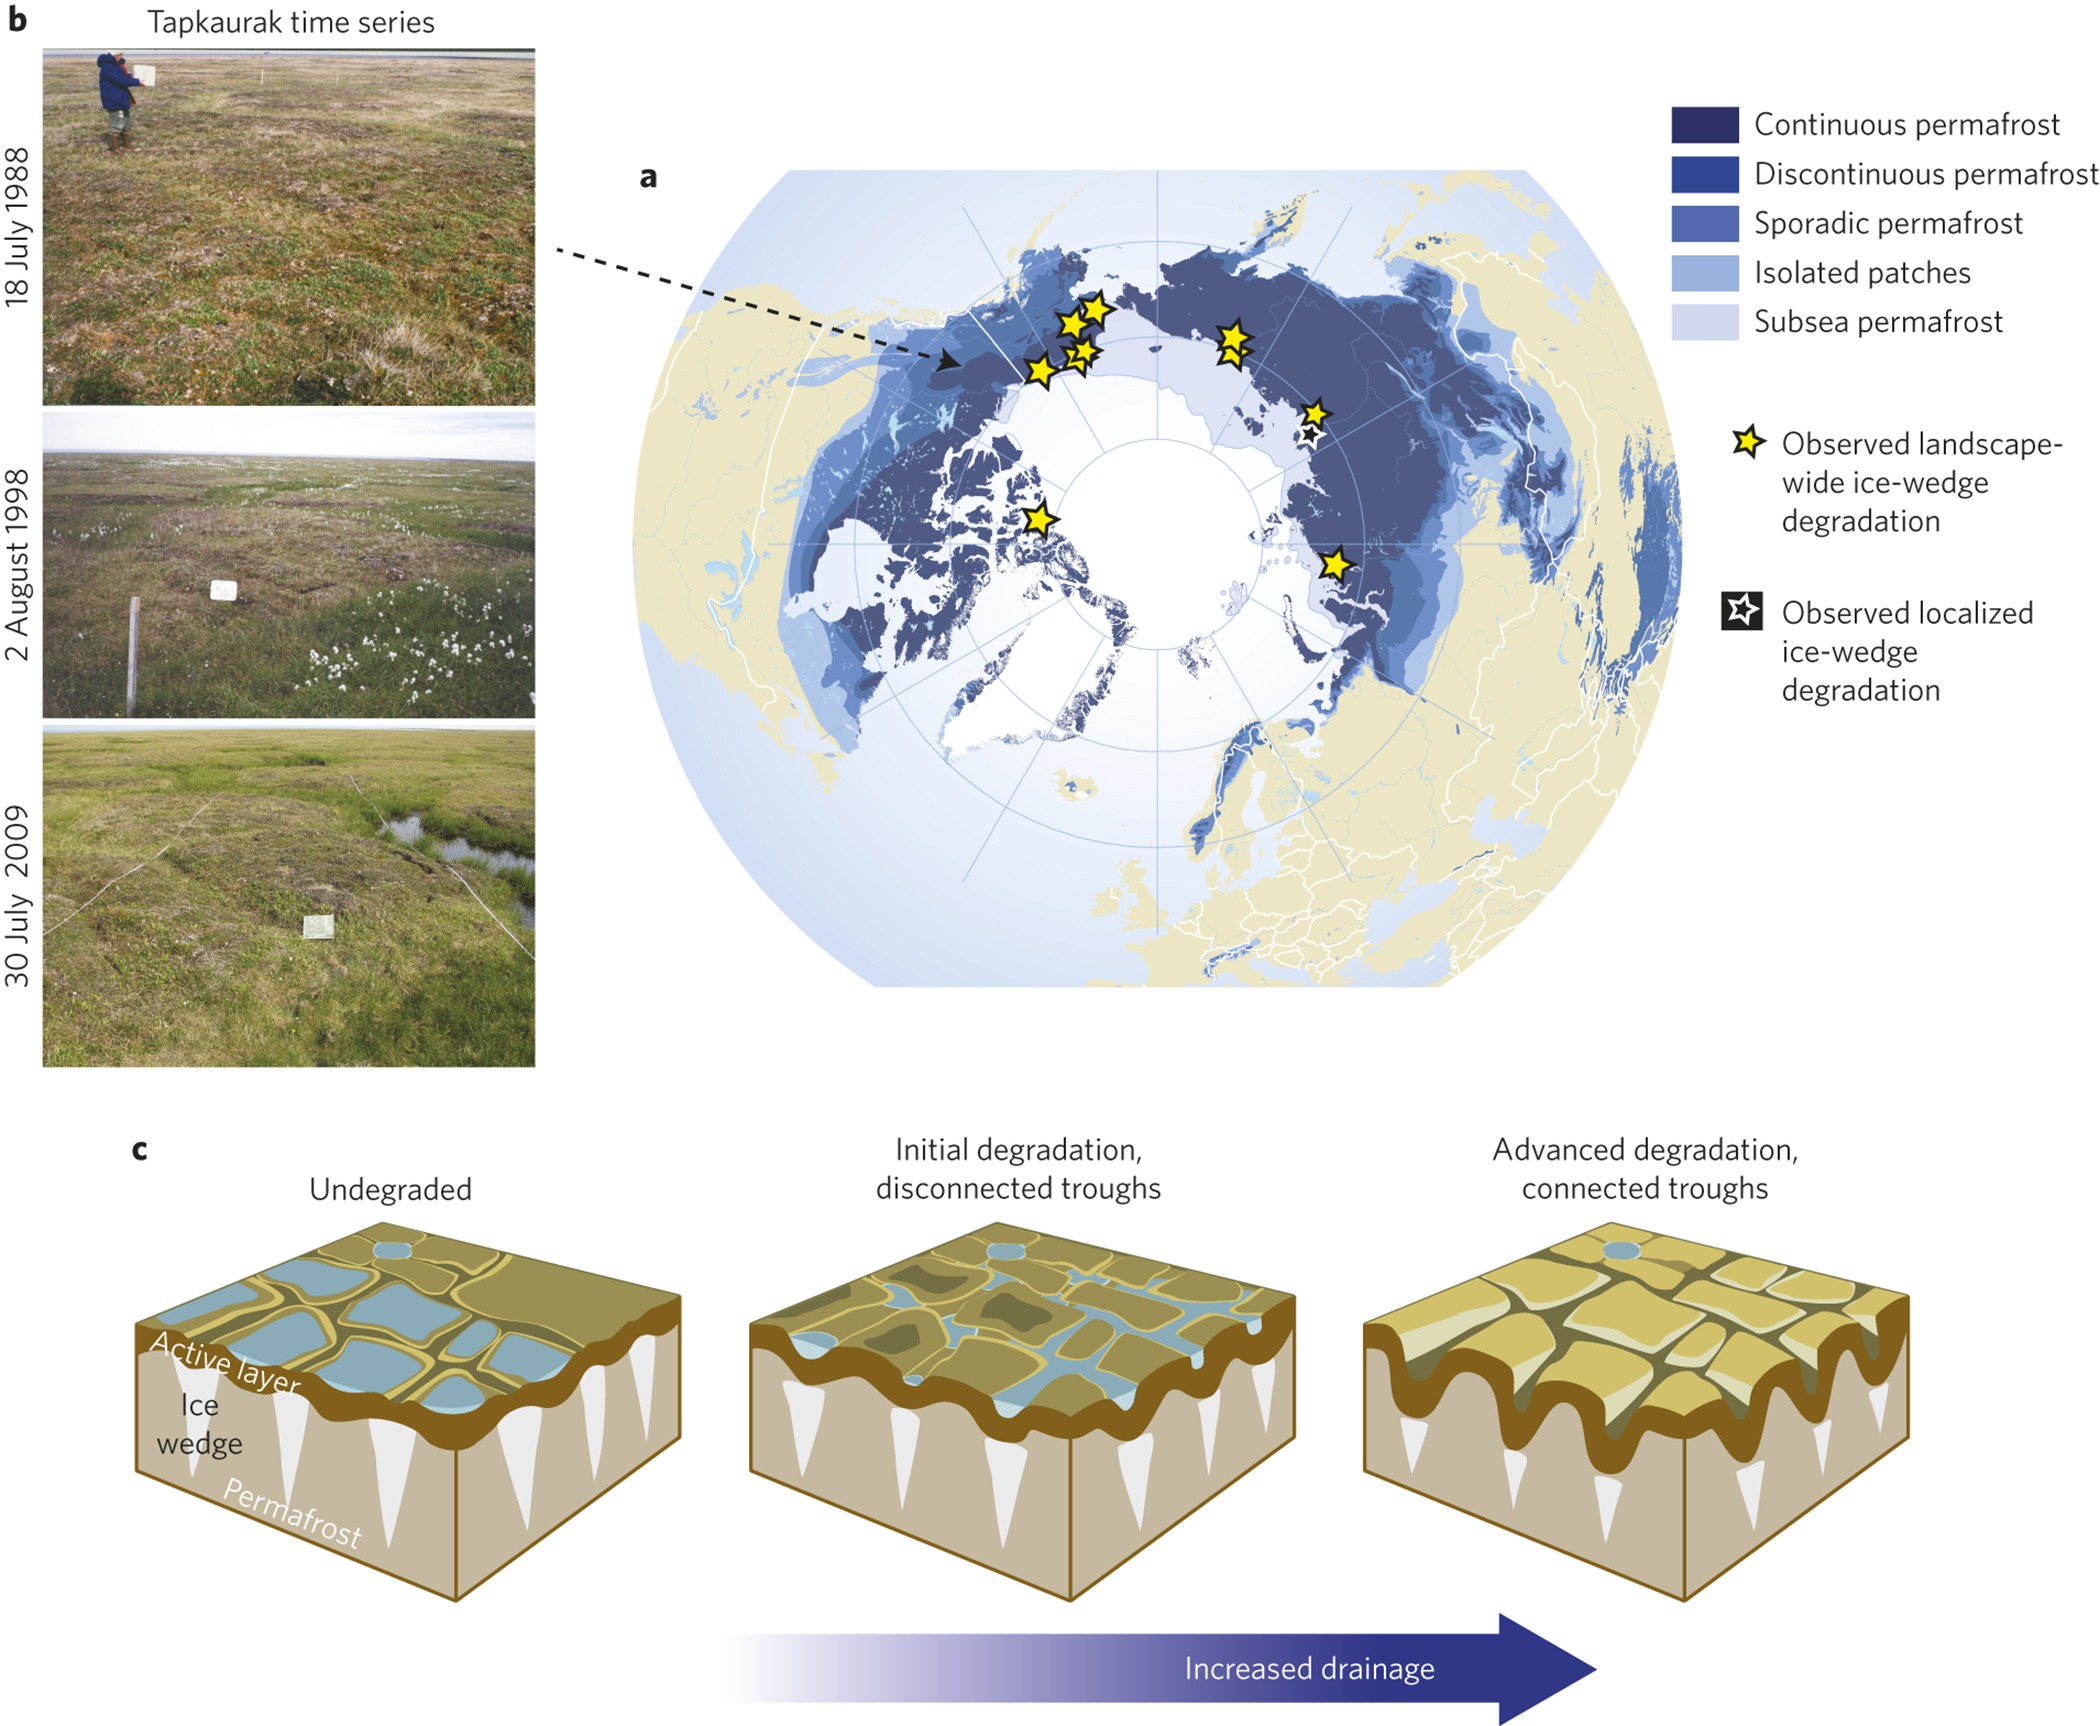 Pan-Arctic ice-wedge degradation in warming permafrost and its influence on  tundra hydrology | Nature Geoscience